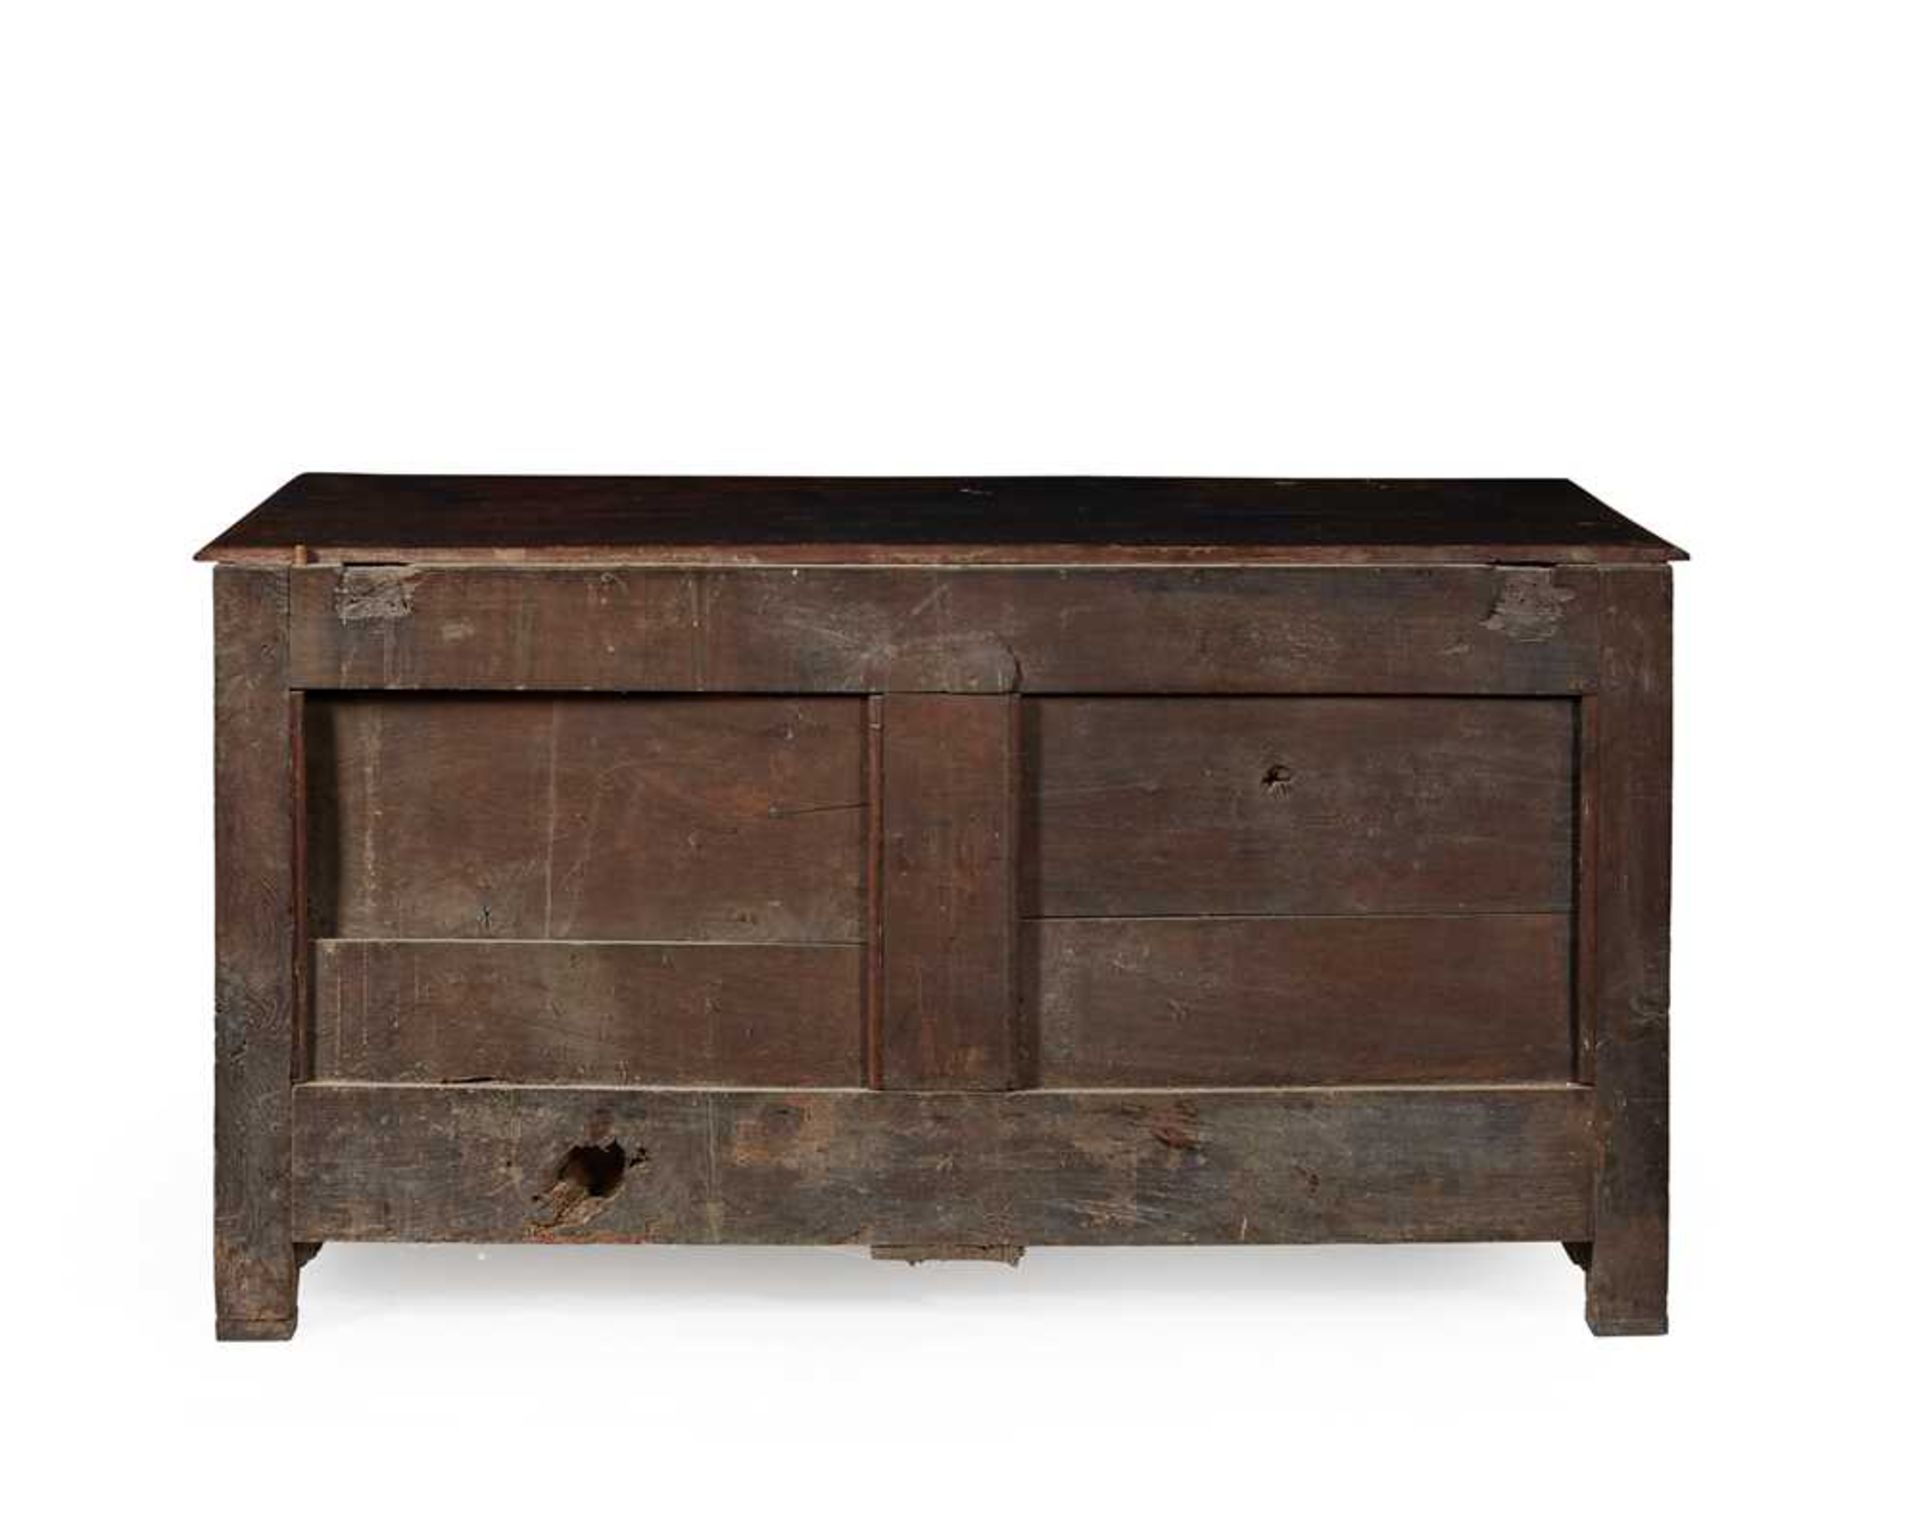 CARVED OAK MULE CHEST LATE 17TH CENTURY WITH ALTERATIONS - Image 2 of 2